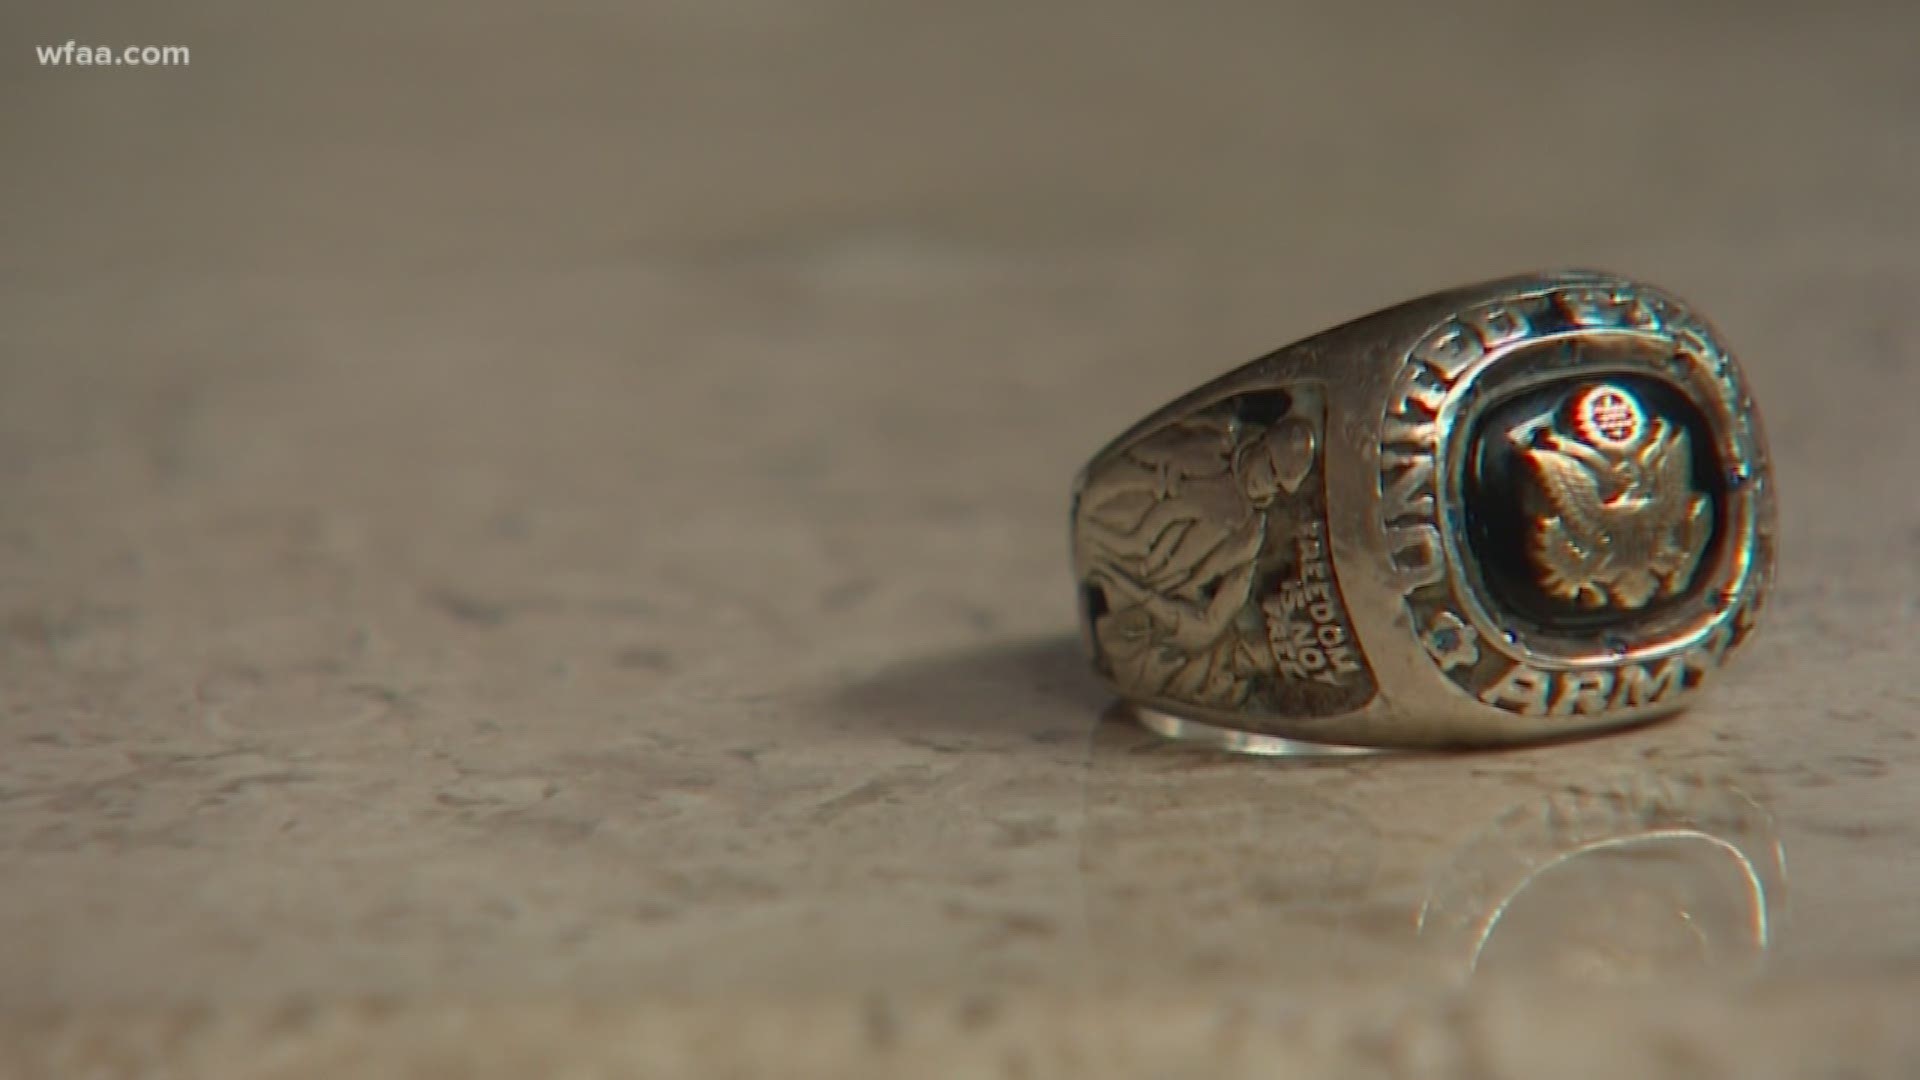 Veteran finds military ring